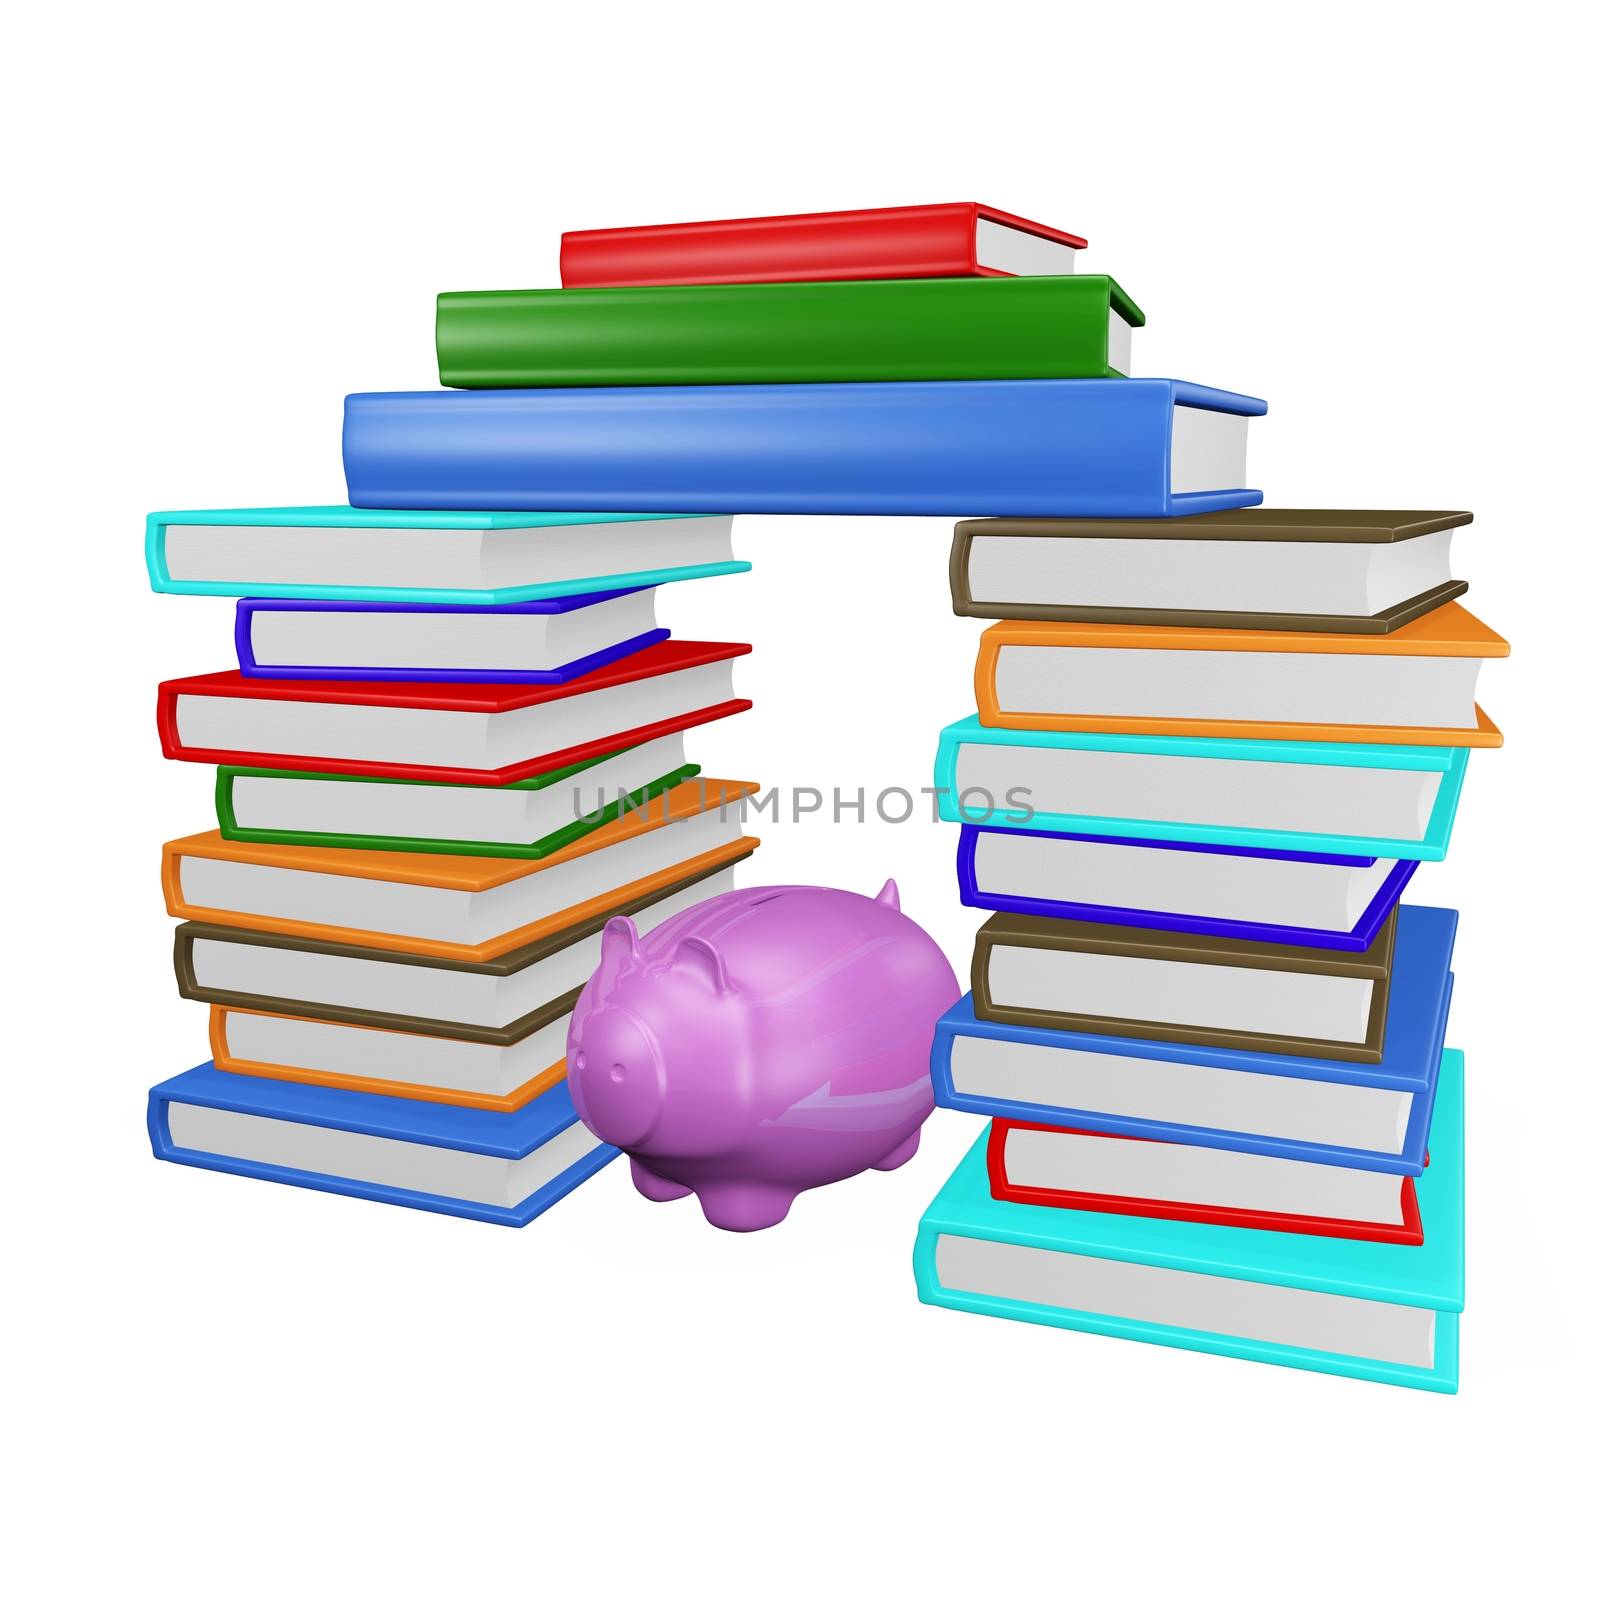 This 3D illustration show a savings piggy bank encased in a house like structure made from pile or stacks of hard bound books. It is ideal for use in education and financial concepts like saving money for higher education. 
